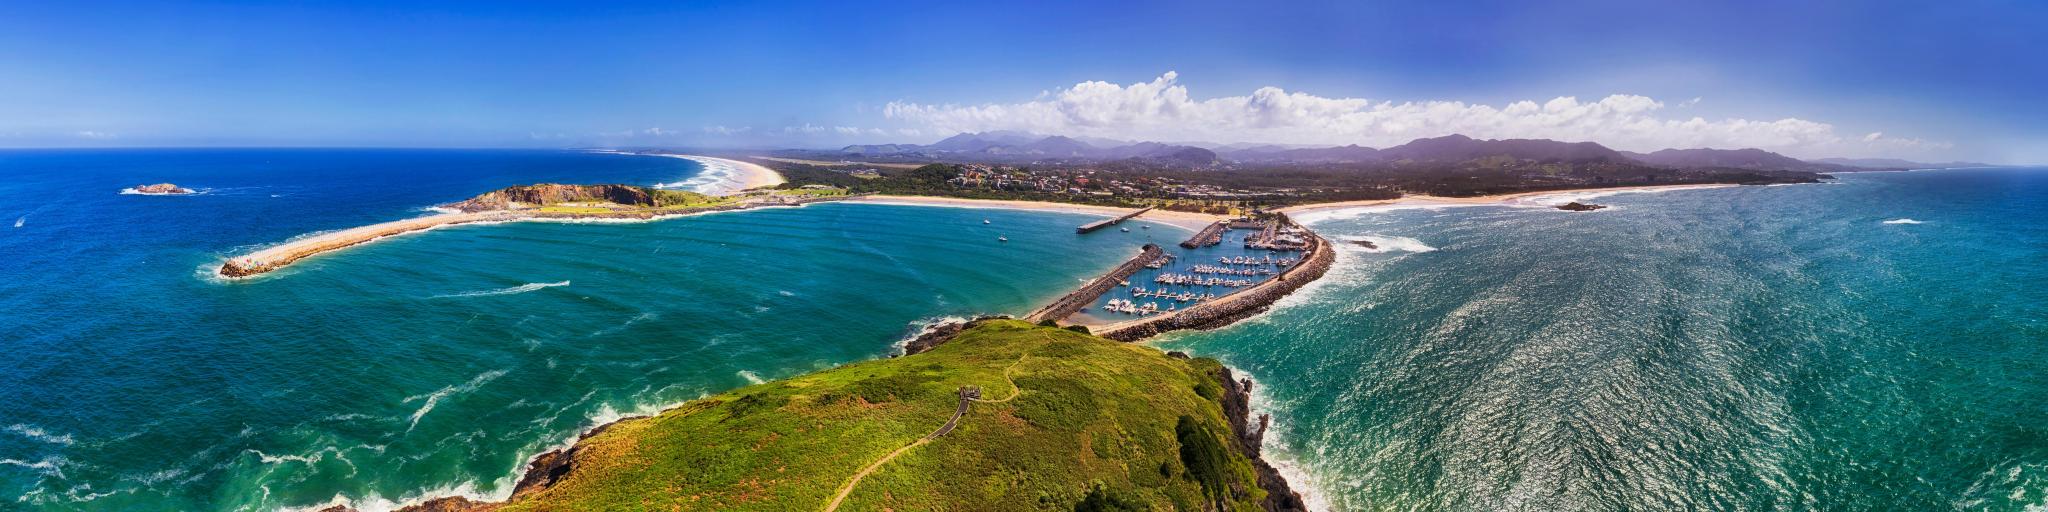 Aerial view of Coffs Harbour, NSW, Australia, showing vivid green land, blue sea and a sandy beach